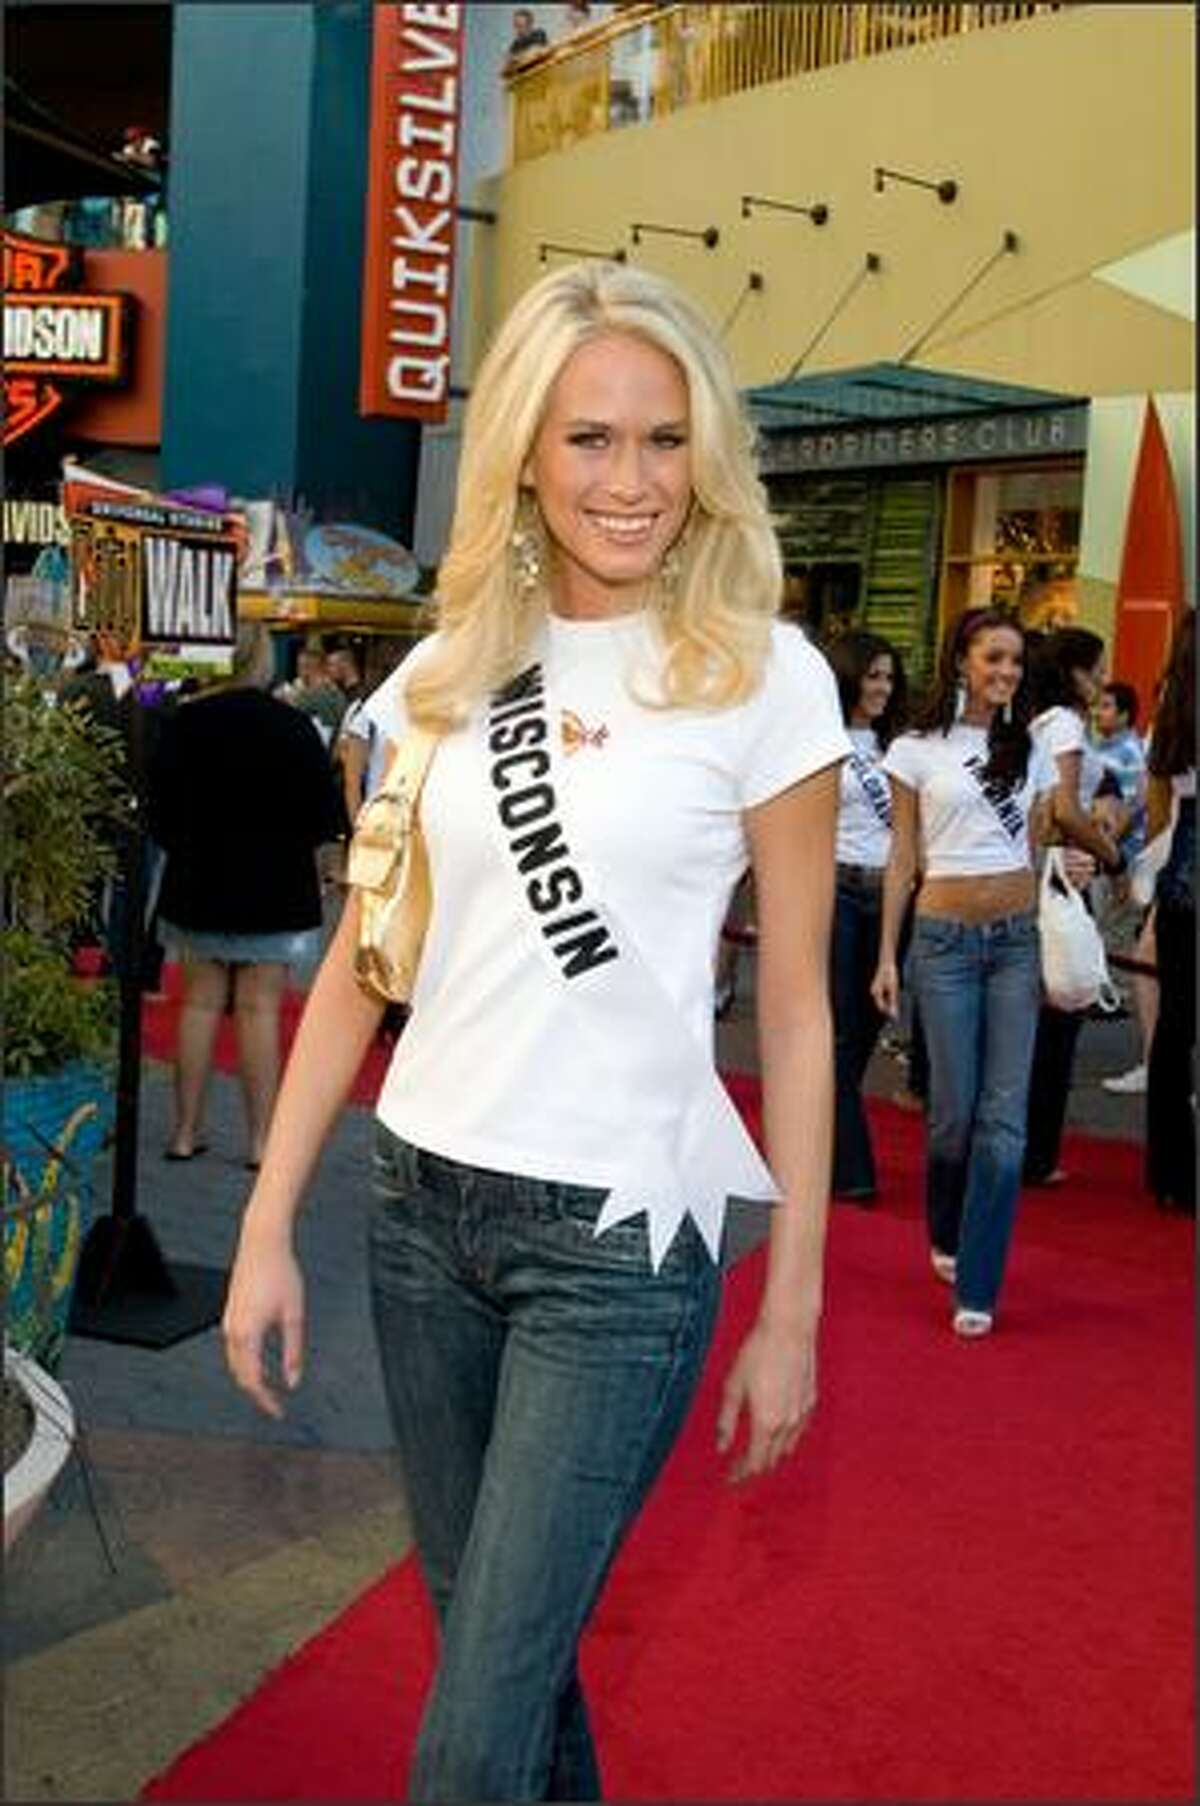 Caitlin Shea Morrall, Miss Wisconsin USA 2007, walks the red carpet at the Hard Rock Cafe.